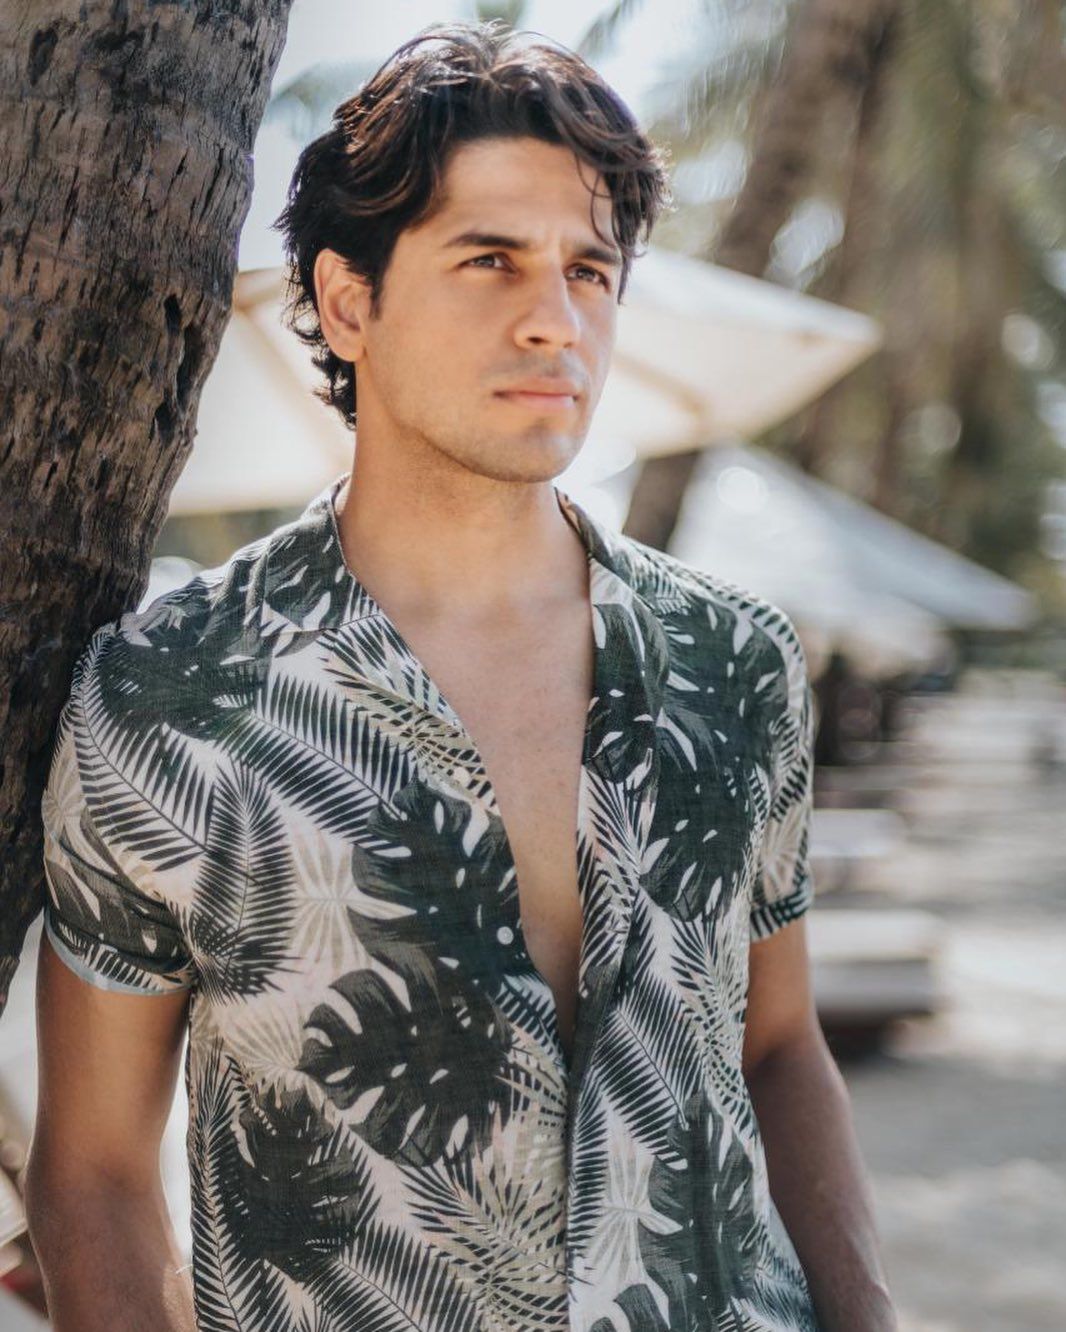 Sidharth Malhotra Introspects About The Lows Of His Career, Says When Films Work No One 'Questions Or Even Criticises You'